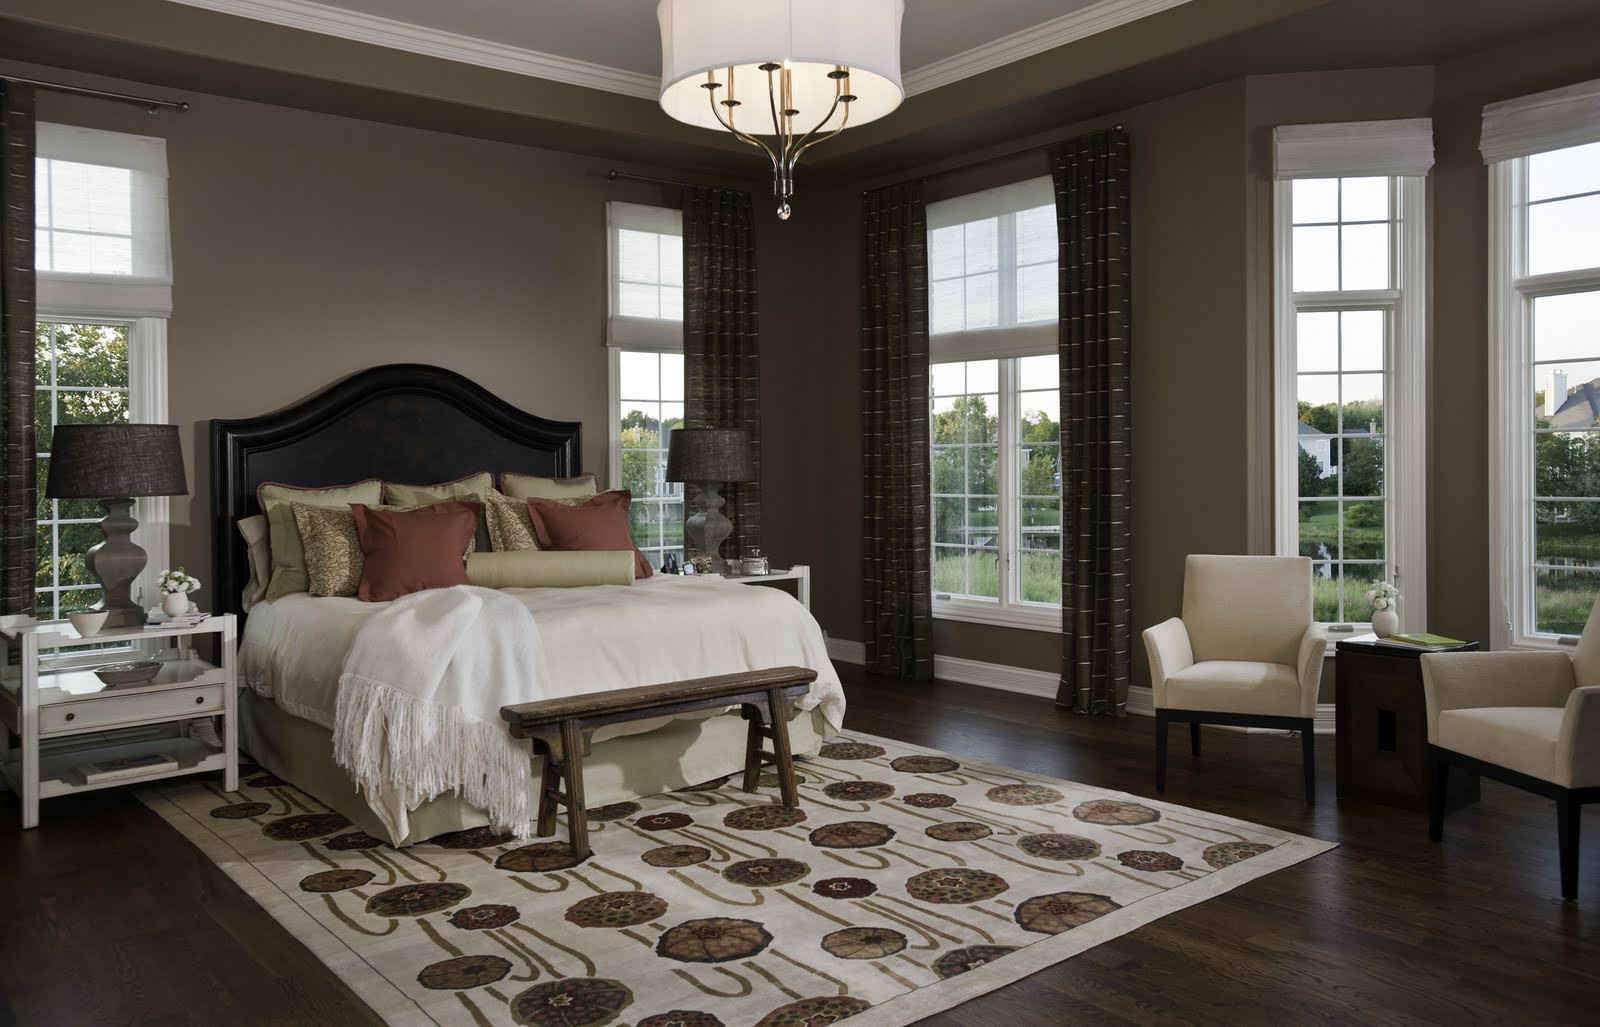 Master Bedroom Window Treatments Fresh Best Window Treatment Ideas and Designs for 2014 Qnud